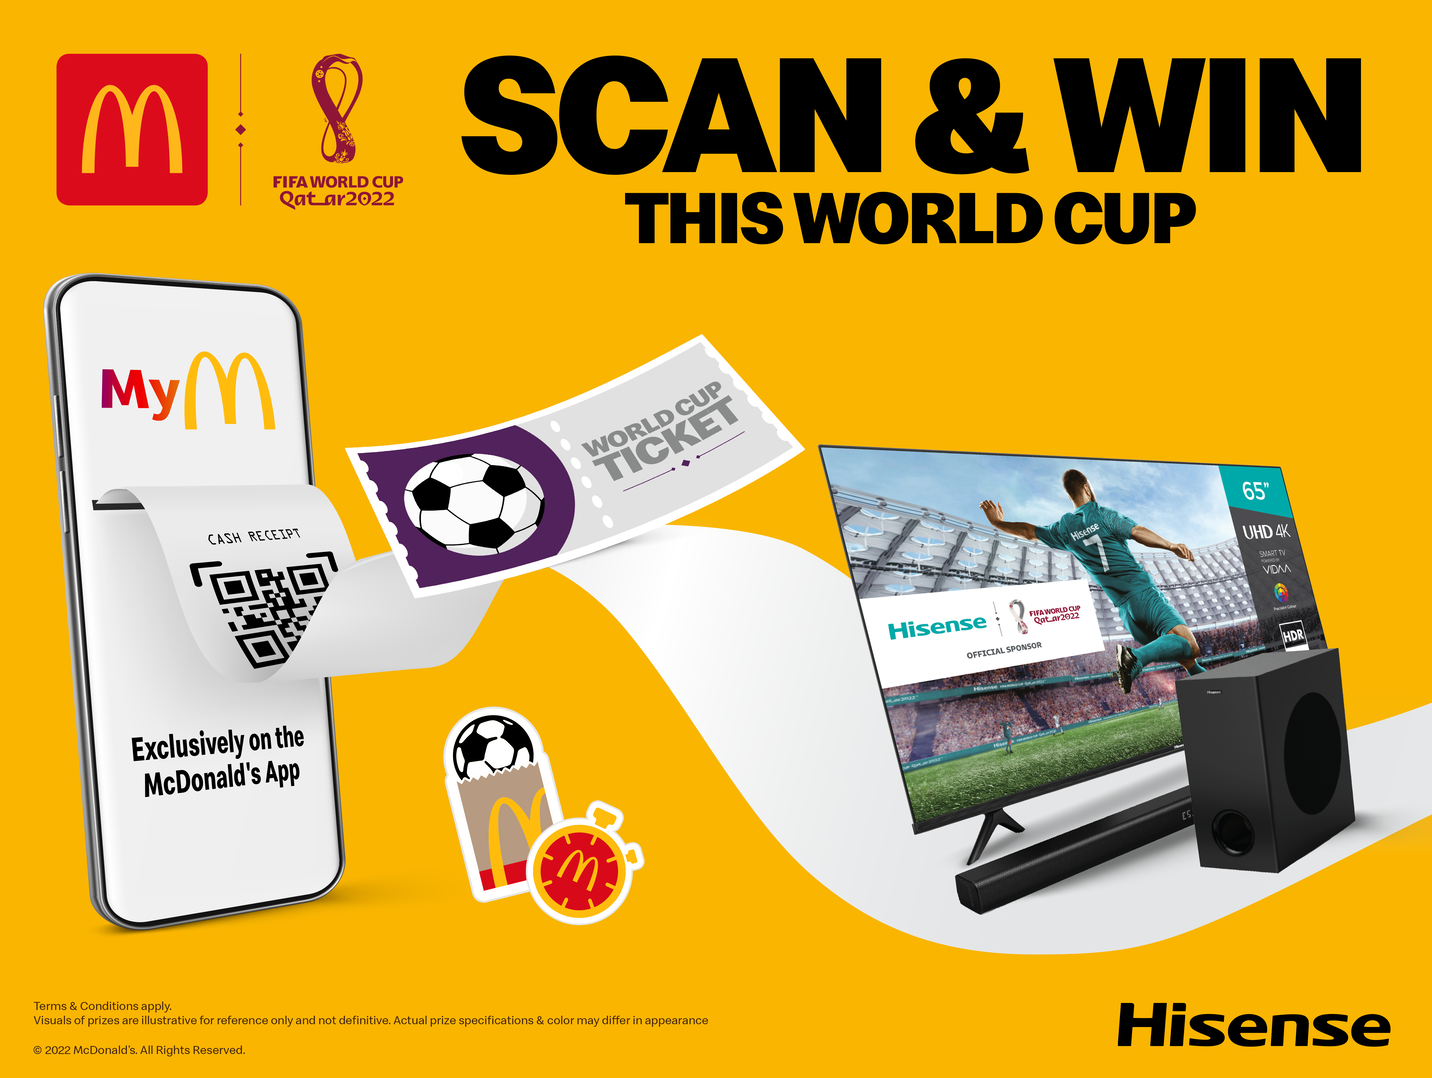 Hisense and Mcdonalds partner for regional World Cup campaign